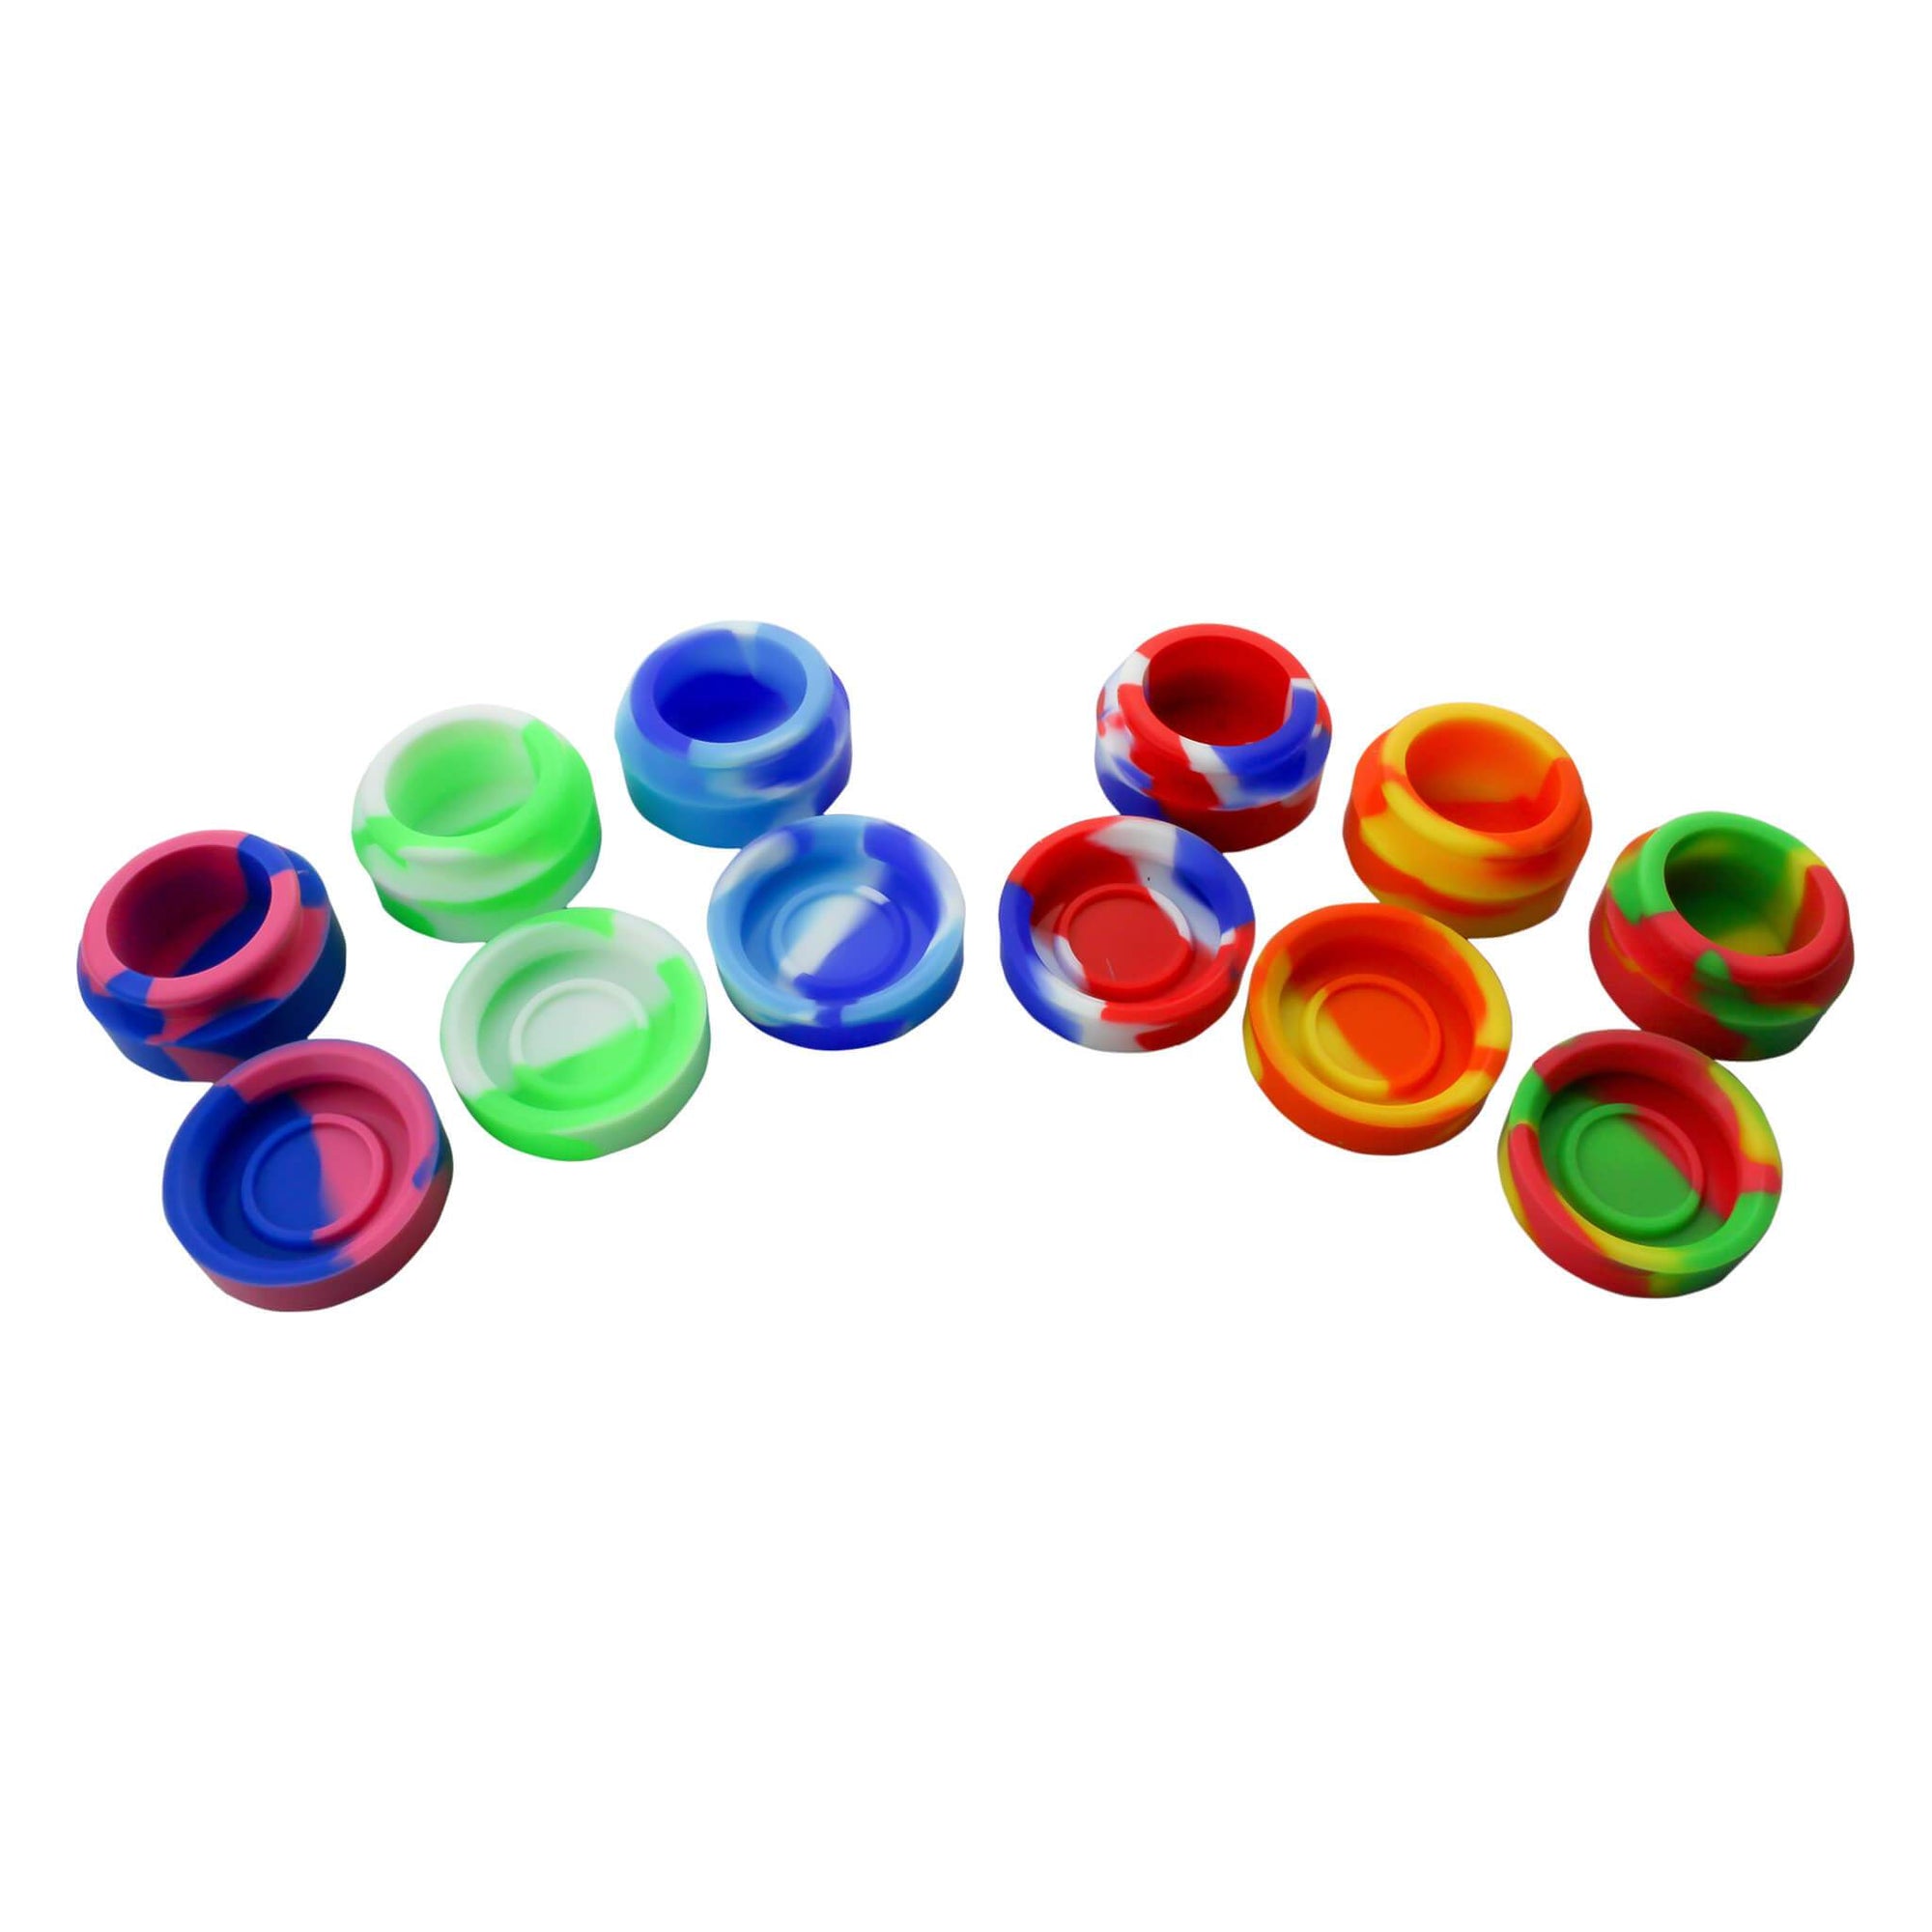 Reclaim Catcher | Dab Reclaim Catcher Colorful Silicone Container Open View | Dabbing Warehouse